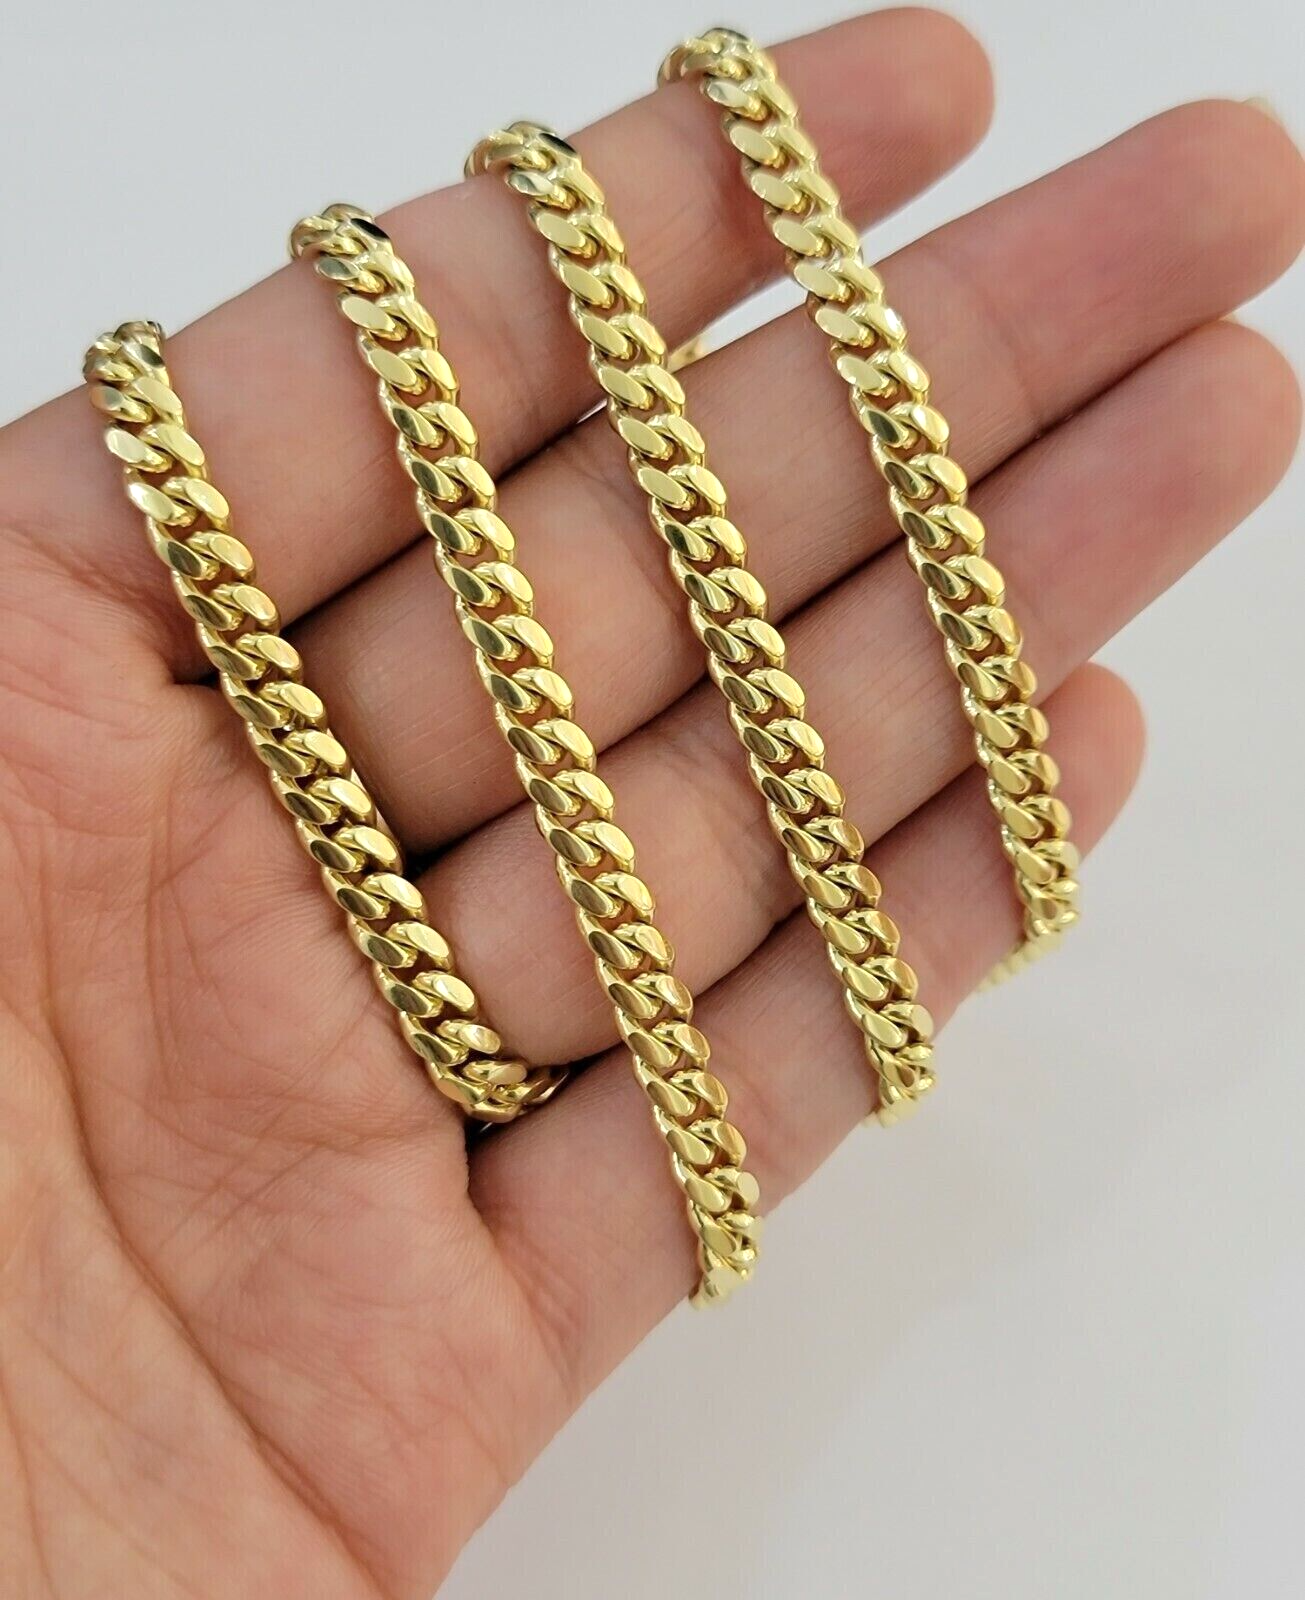 Solid 14k Yellow Gold chain 22 Inch Miami Cuban Necklace 4mm STRONG Links REAL